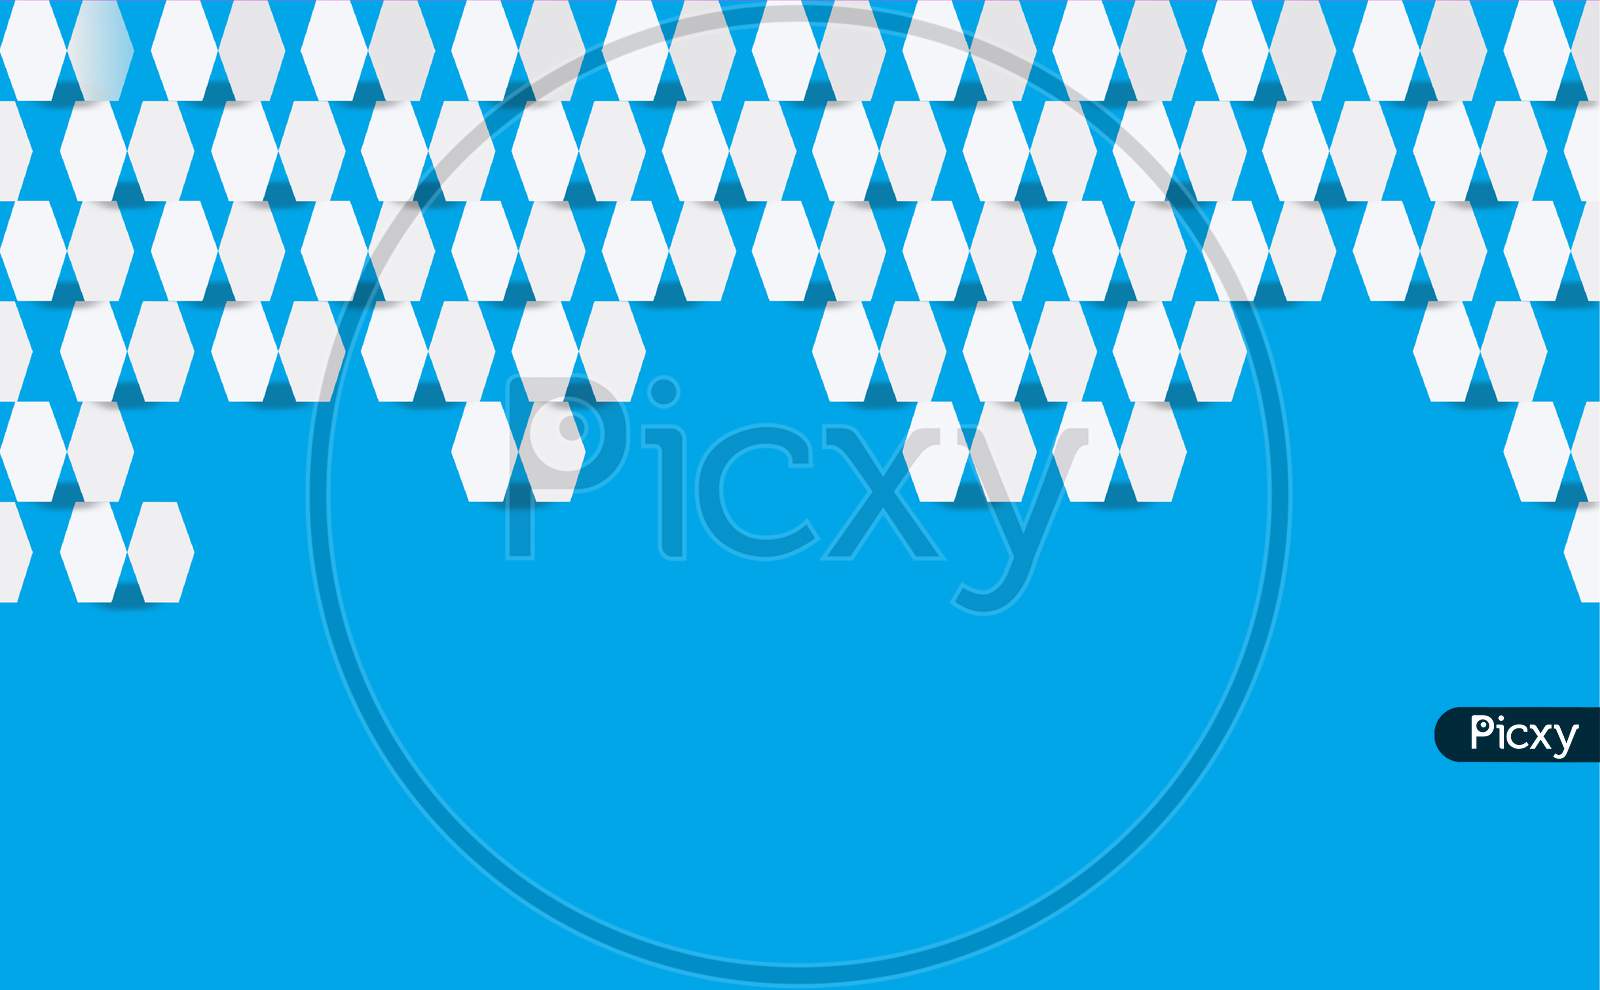 White and blue abstract texture. Vector background 3d paper cutout art style can be used in cover design, book design, poster, cd cover, flyer, website backgrounds or advertising.